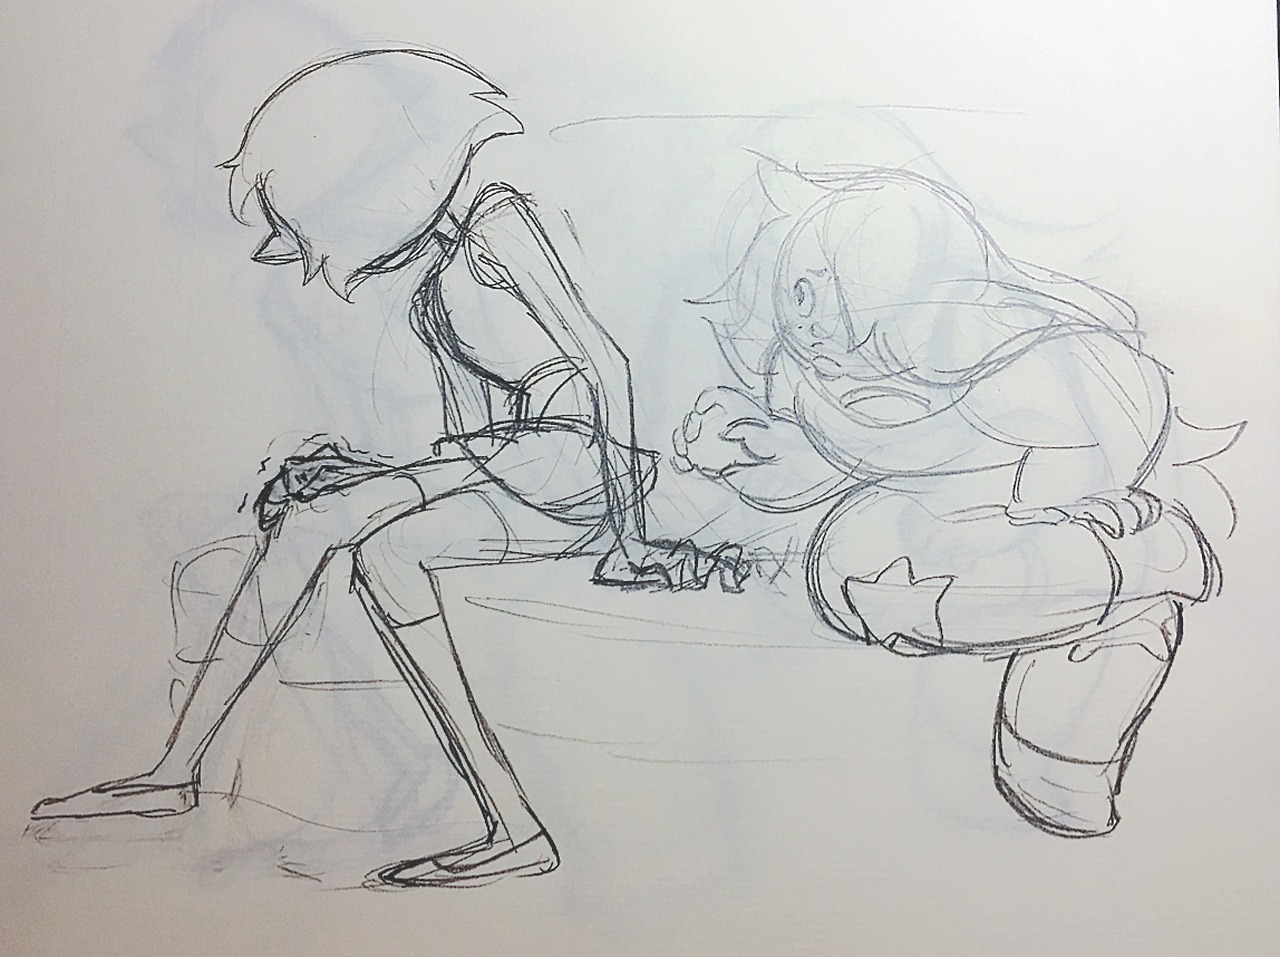 Have a small collection of sketches from Twitter for Pearlmethyst week